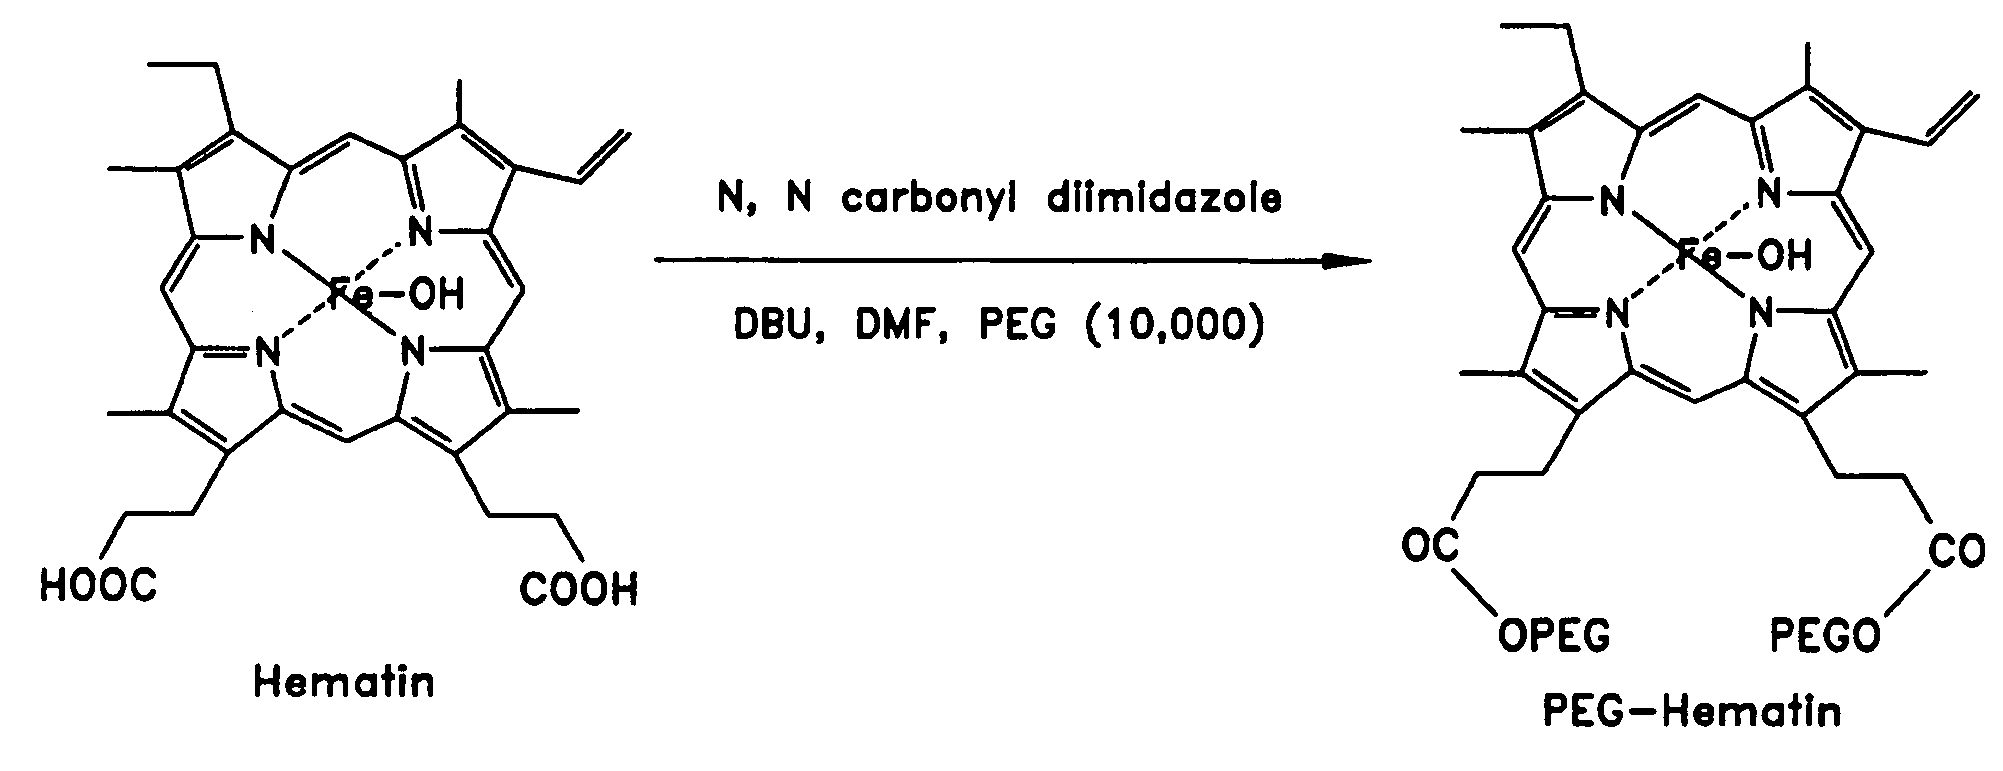 Assembled hematin, method for forming same and method for polymerizing aromatic monomers using same